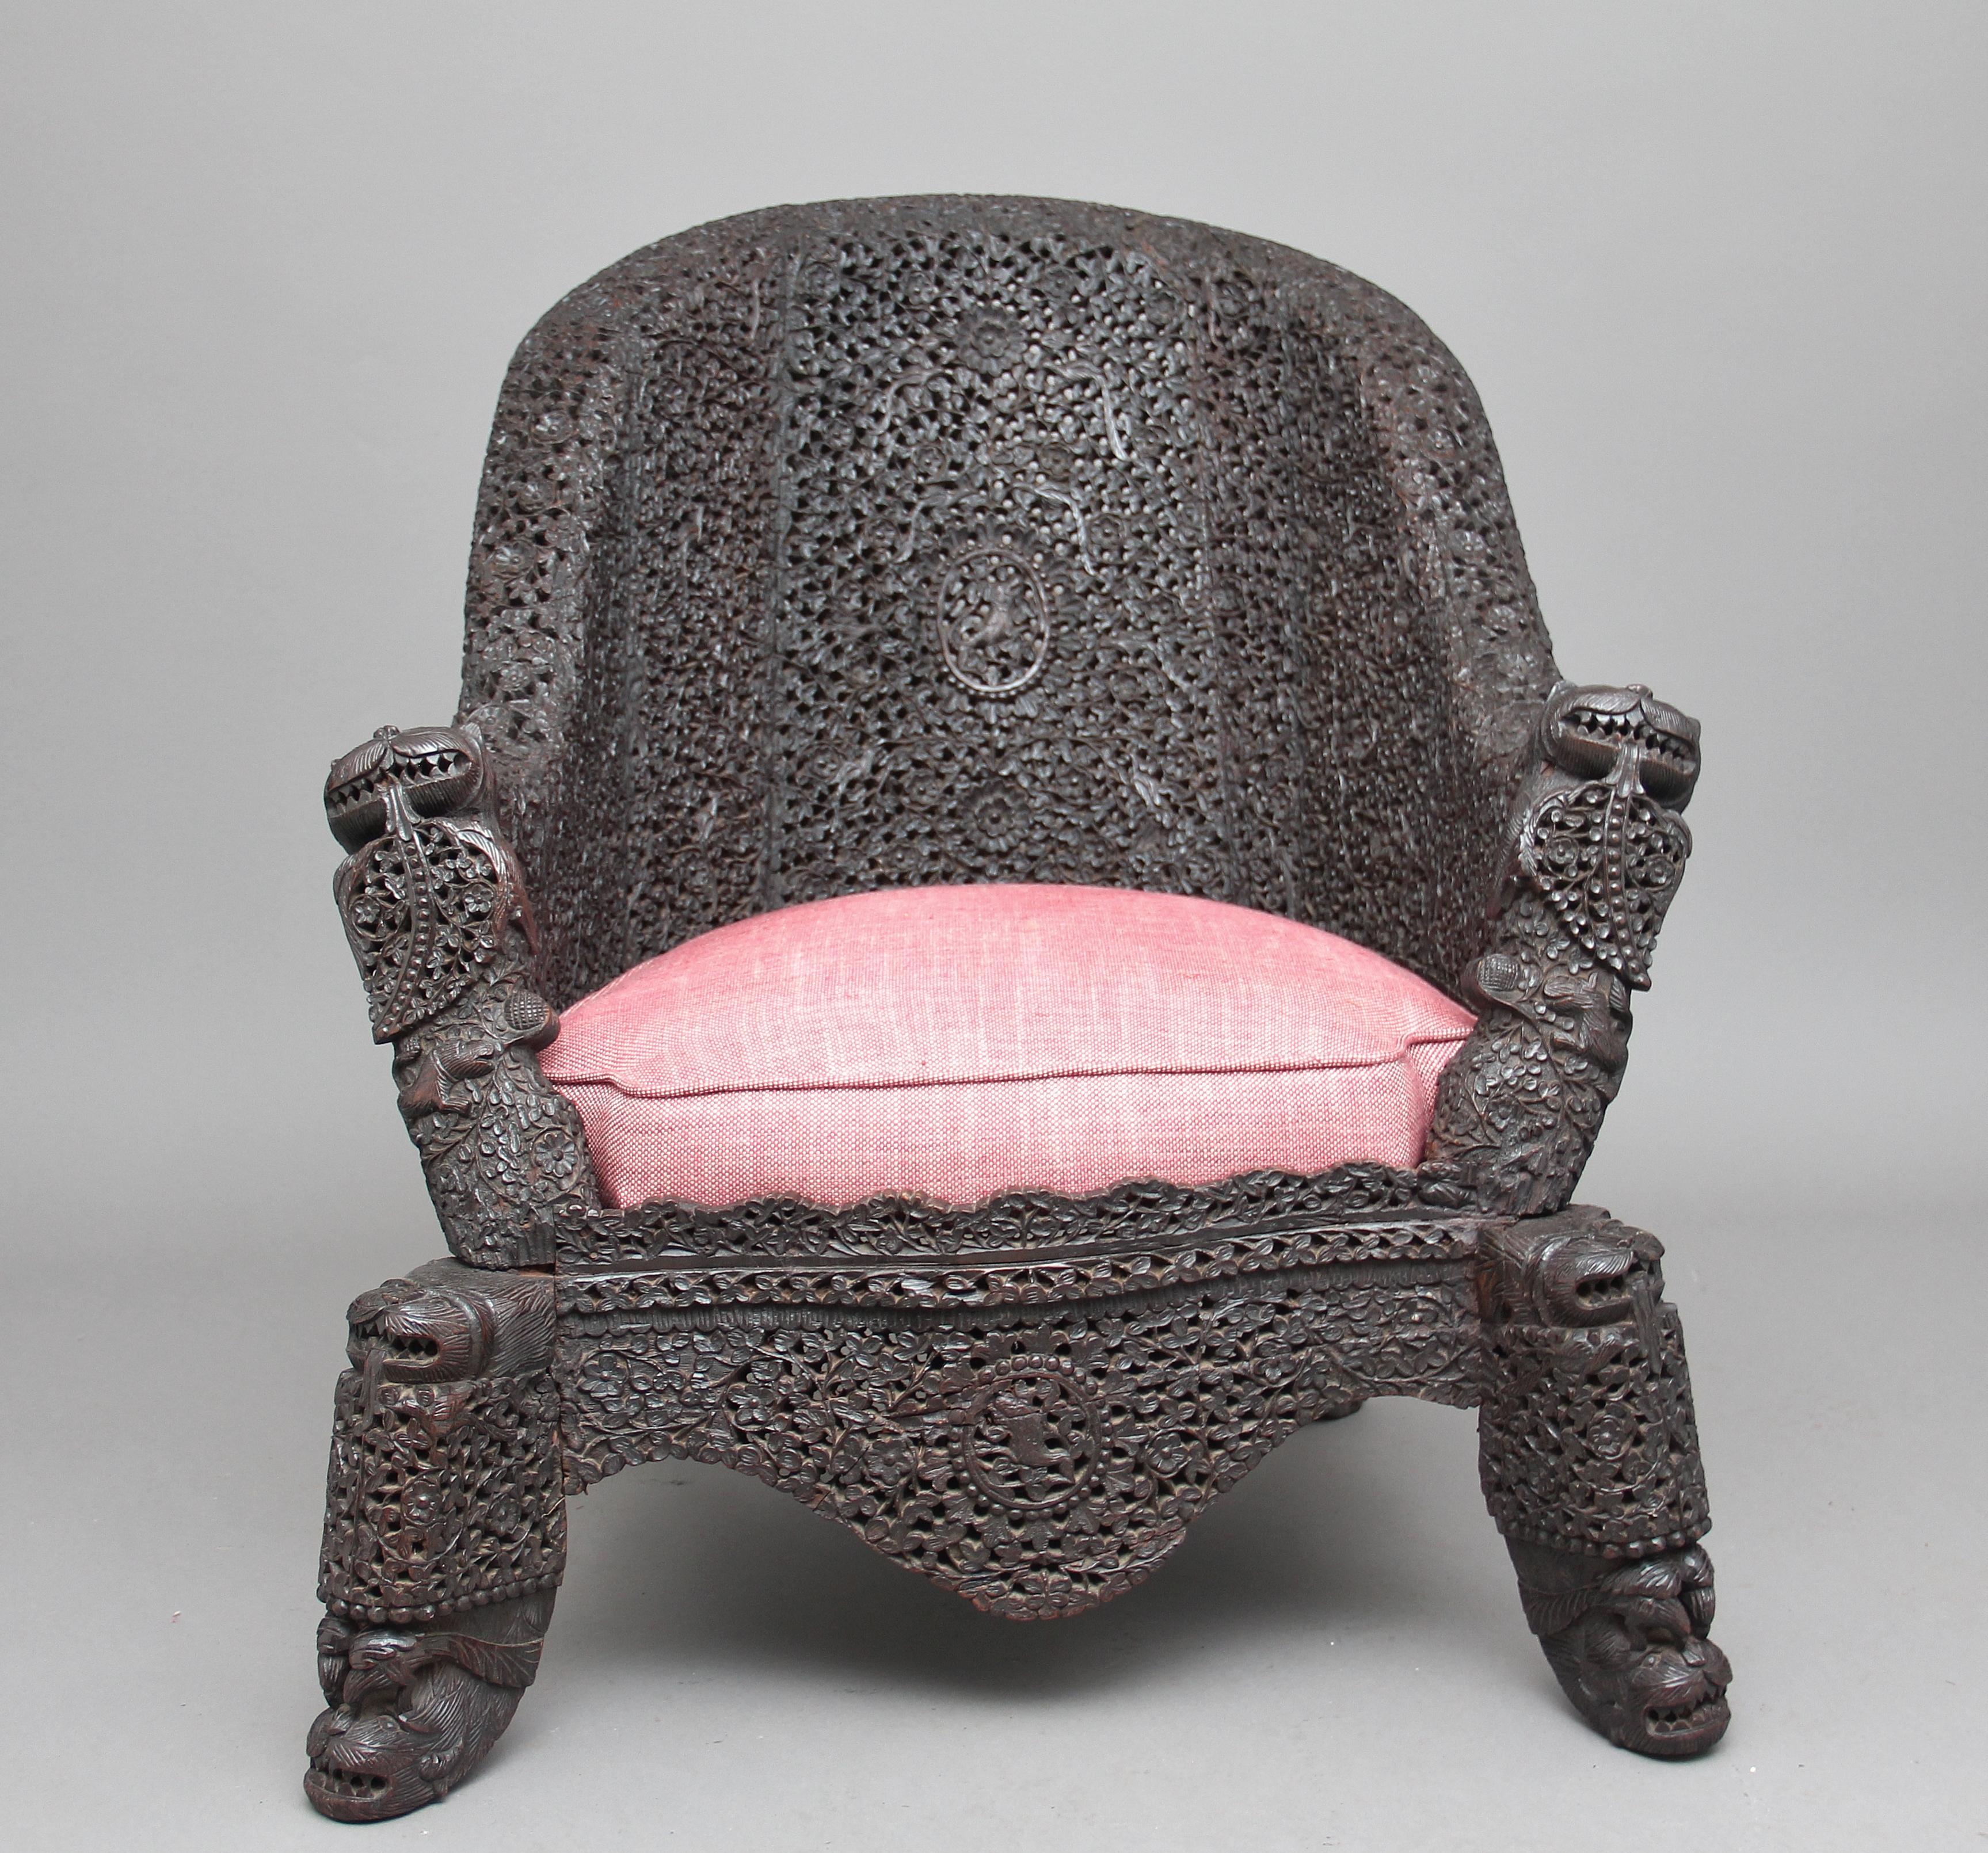 19th century carved hardwood Burmese chair, profusely carved all over with carved fret decoration, with a drop in upholstered seat, mythical figure heads on the arms and top of the legs, the bottom section having a nice carved shaped apron along the